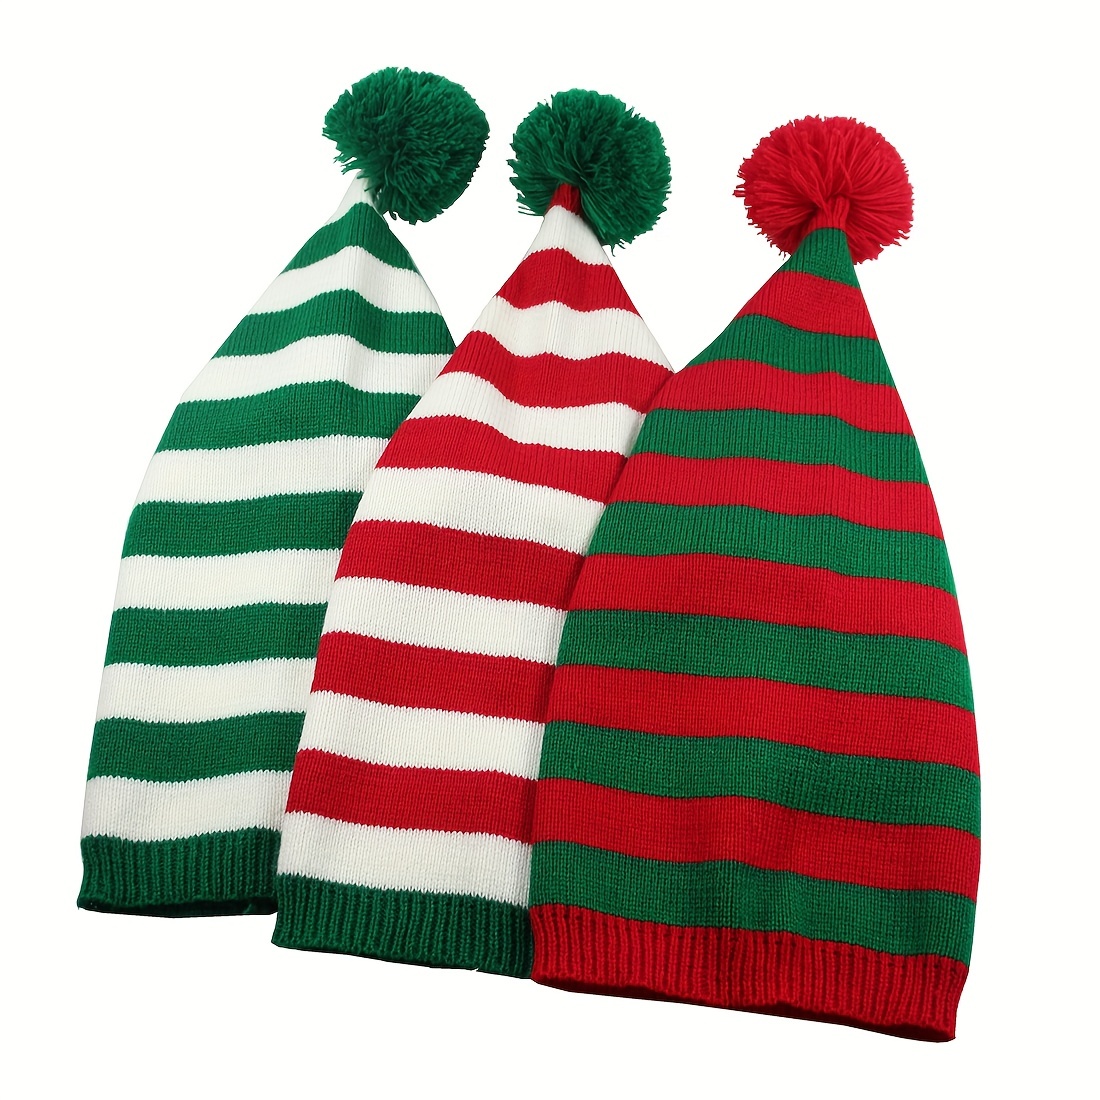 red green striped christmas beanie with pom color block knit hat lightweight couple beanie winter warm skull cap for women men